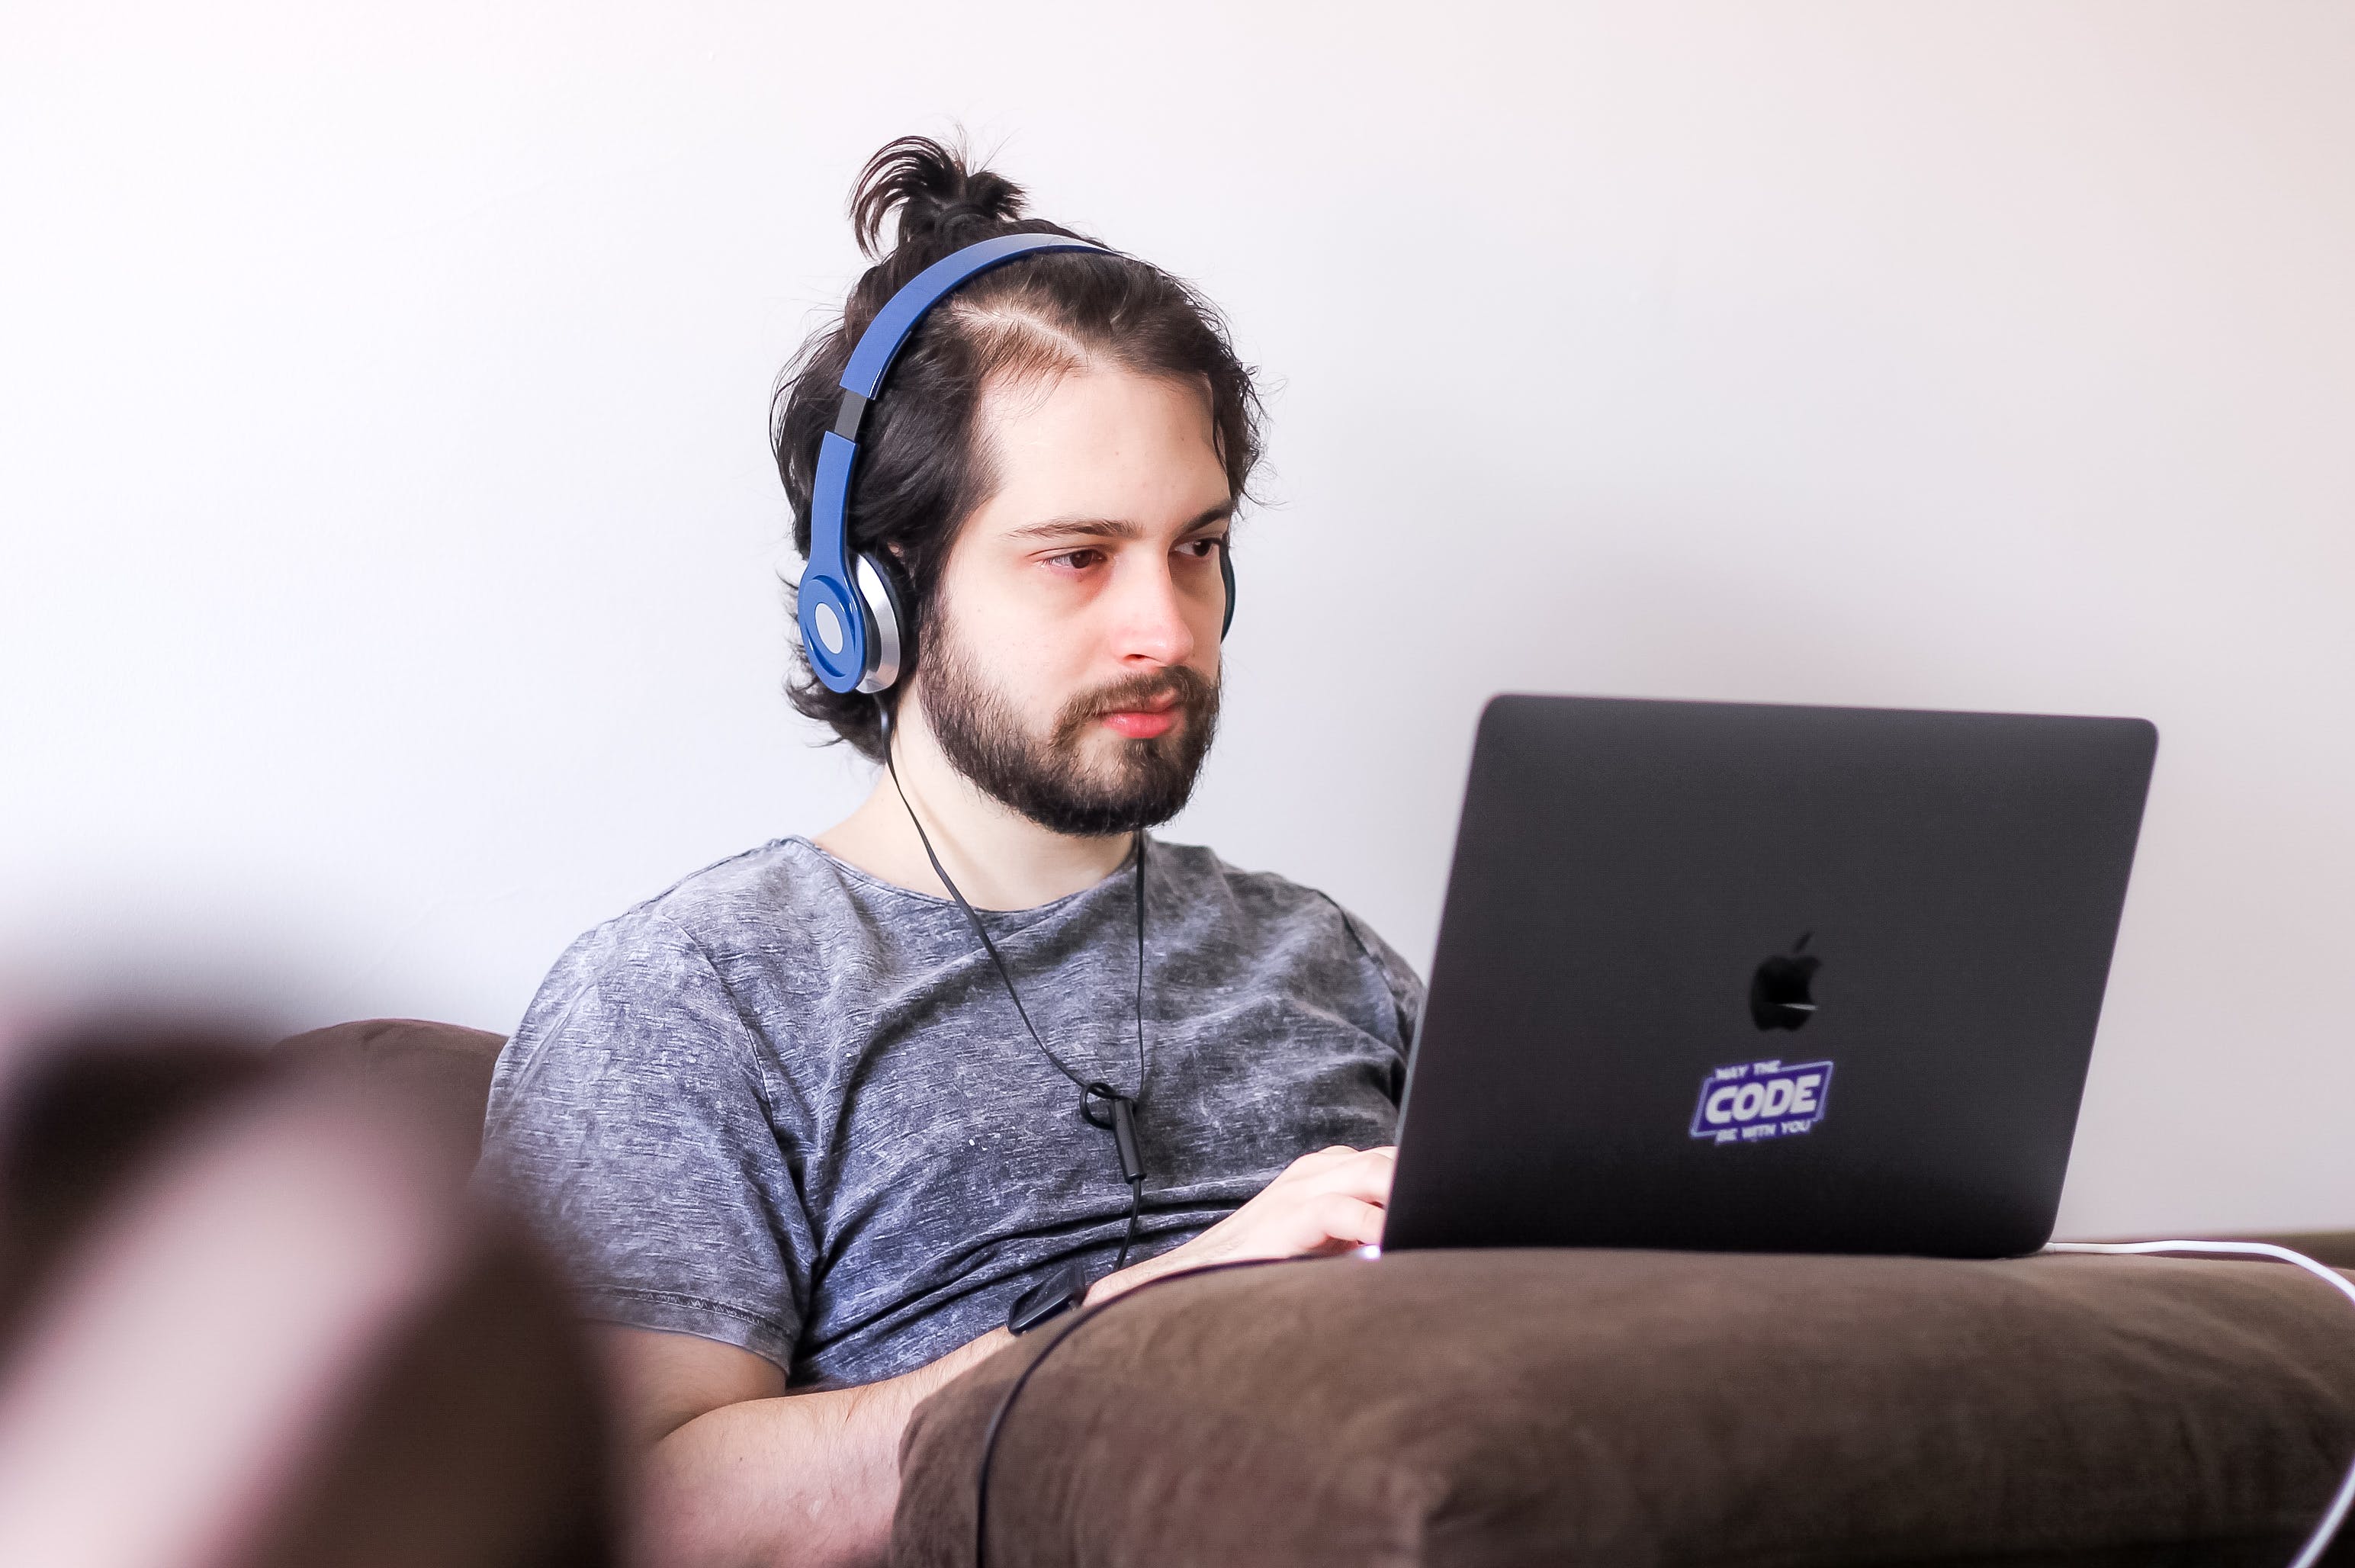 Man sitting in front of his laptop while wearing blue headphones